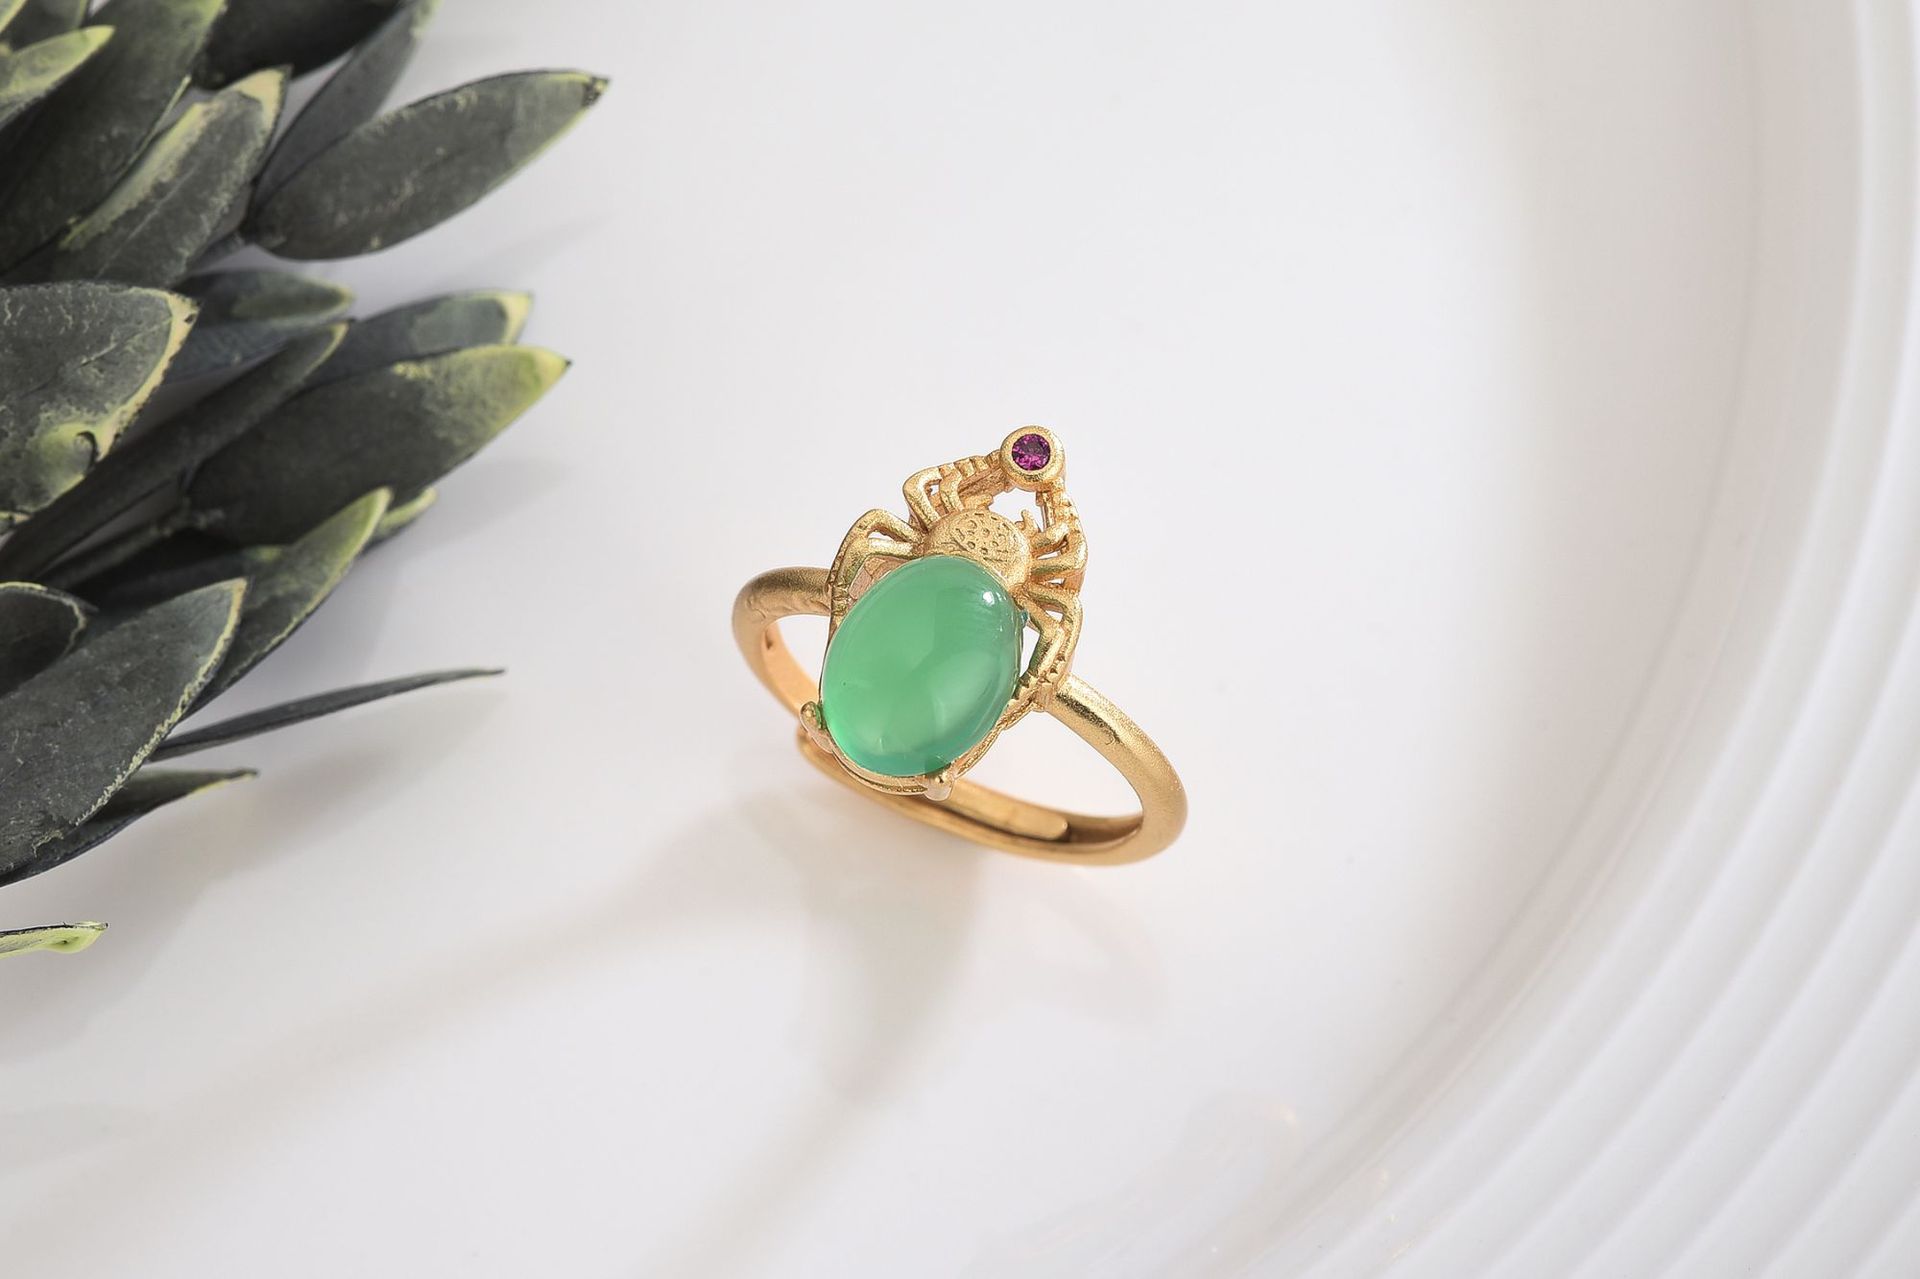 7x9mm ring (including chrysoprase) with adjustable